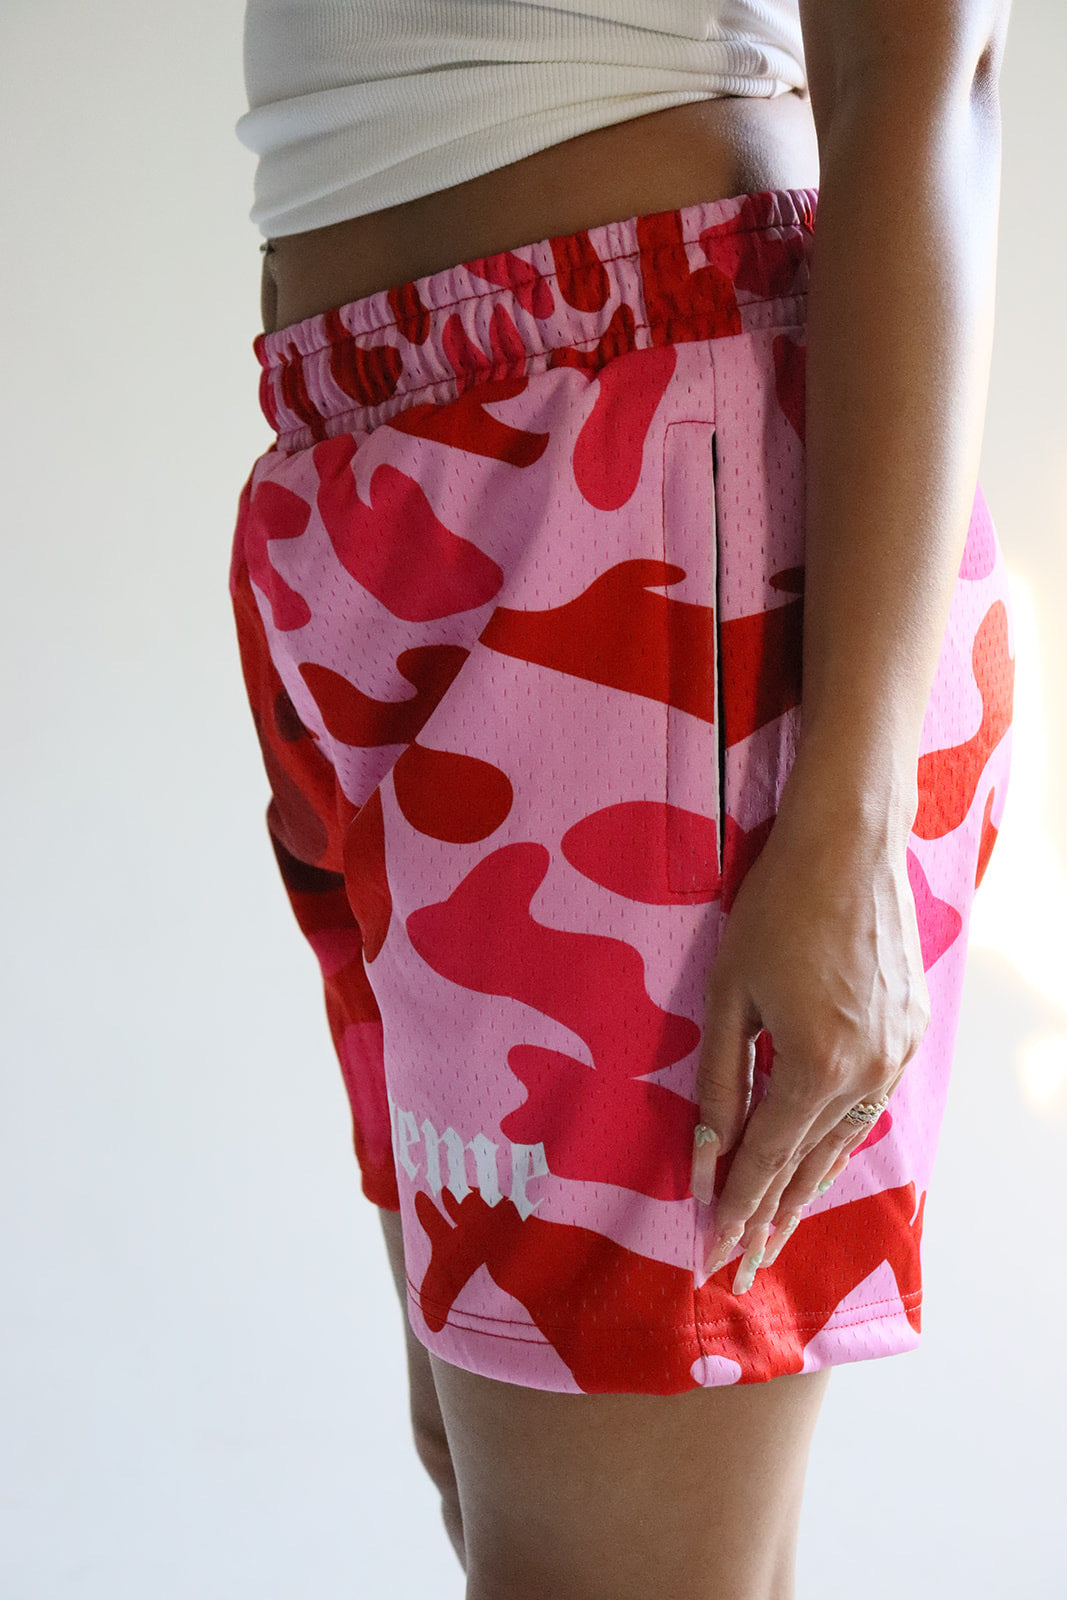 Men's graphic mesh shorts with a picture of red pink camo